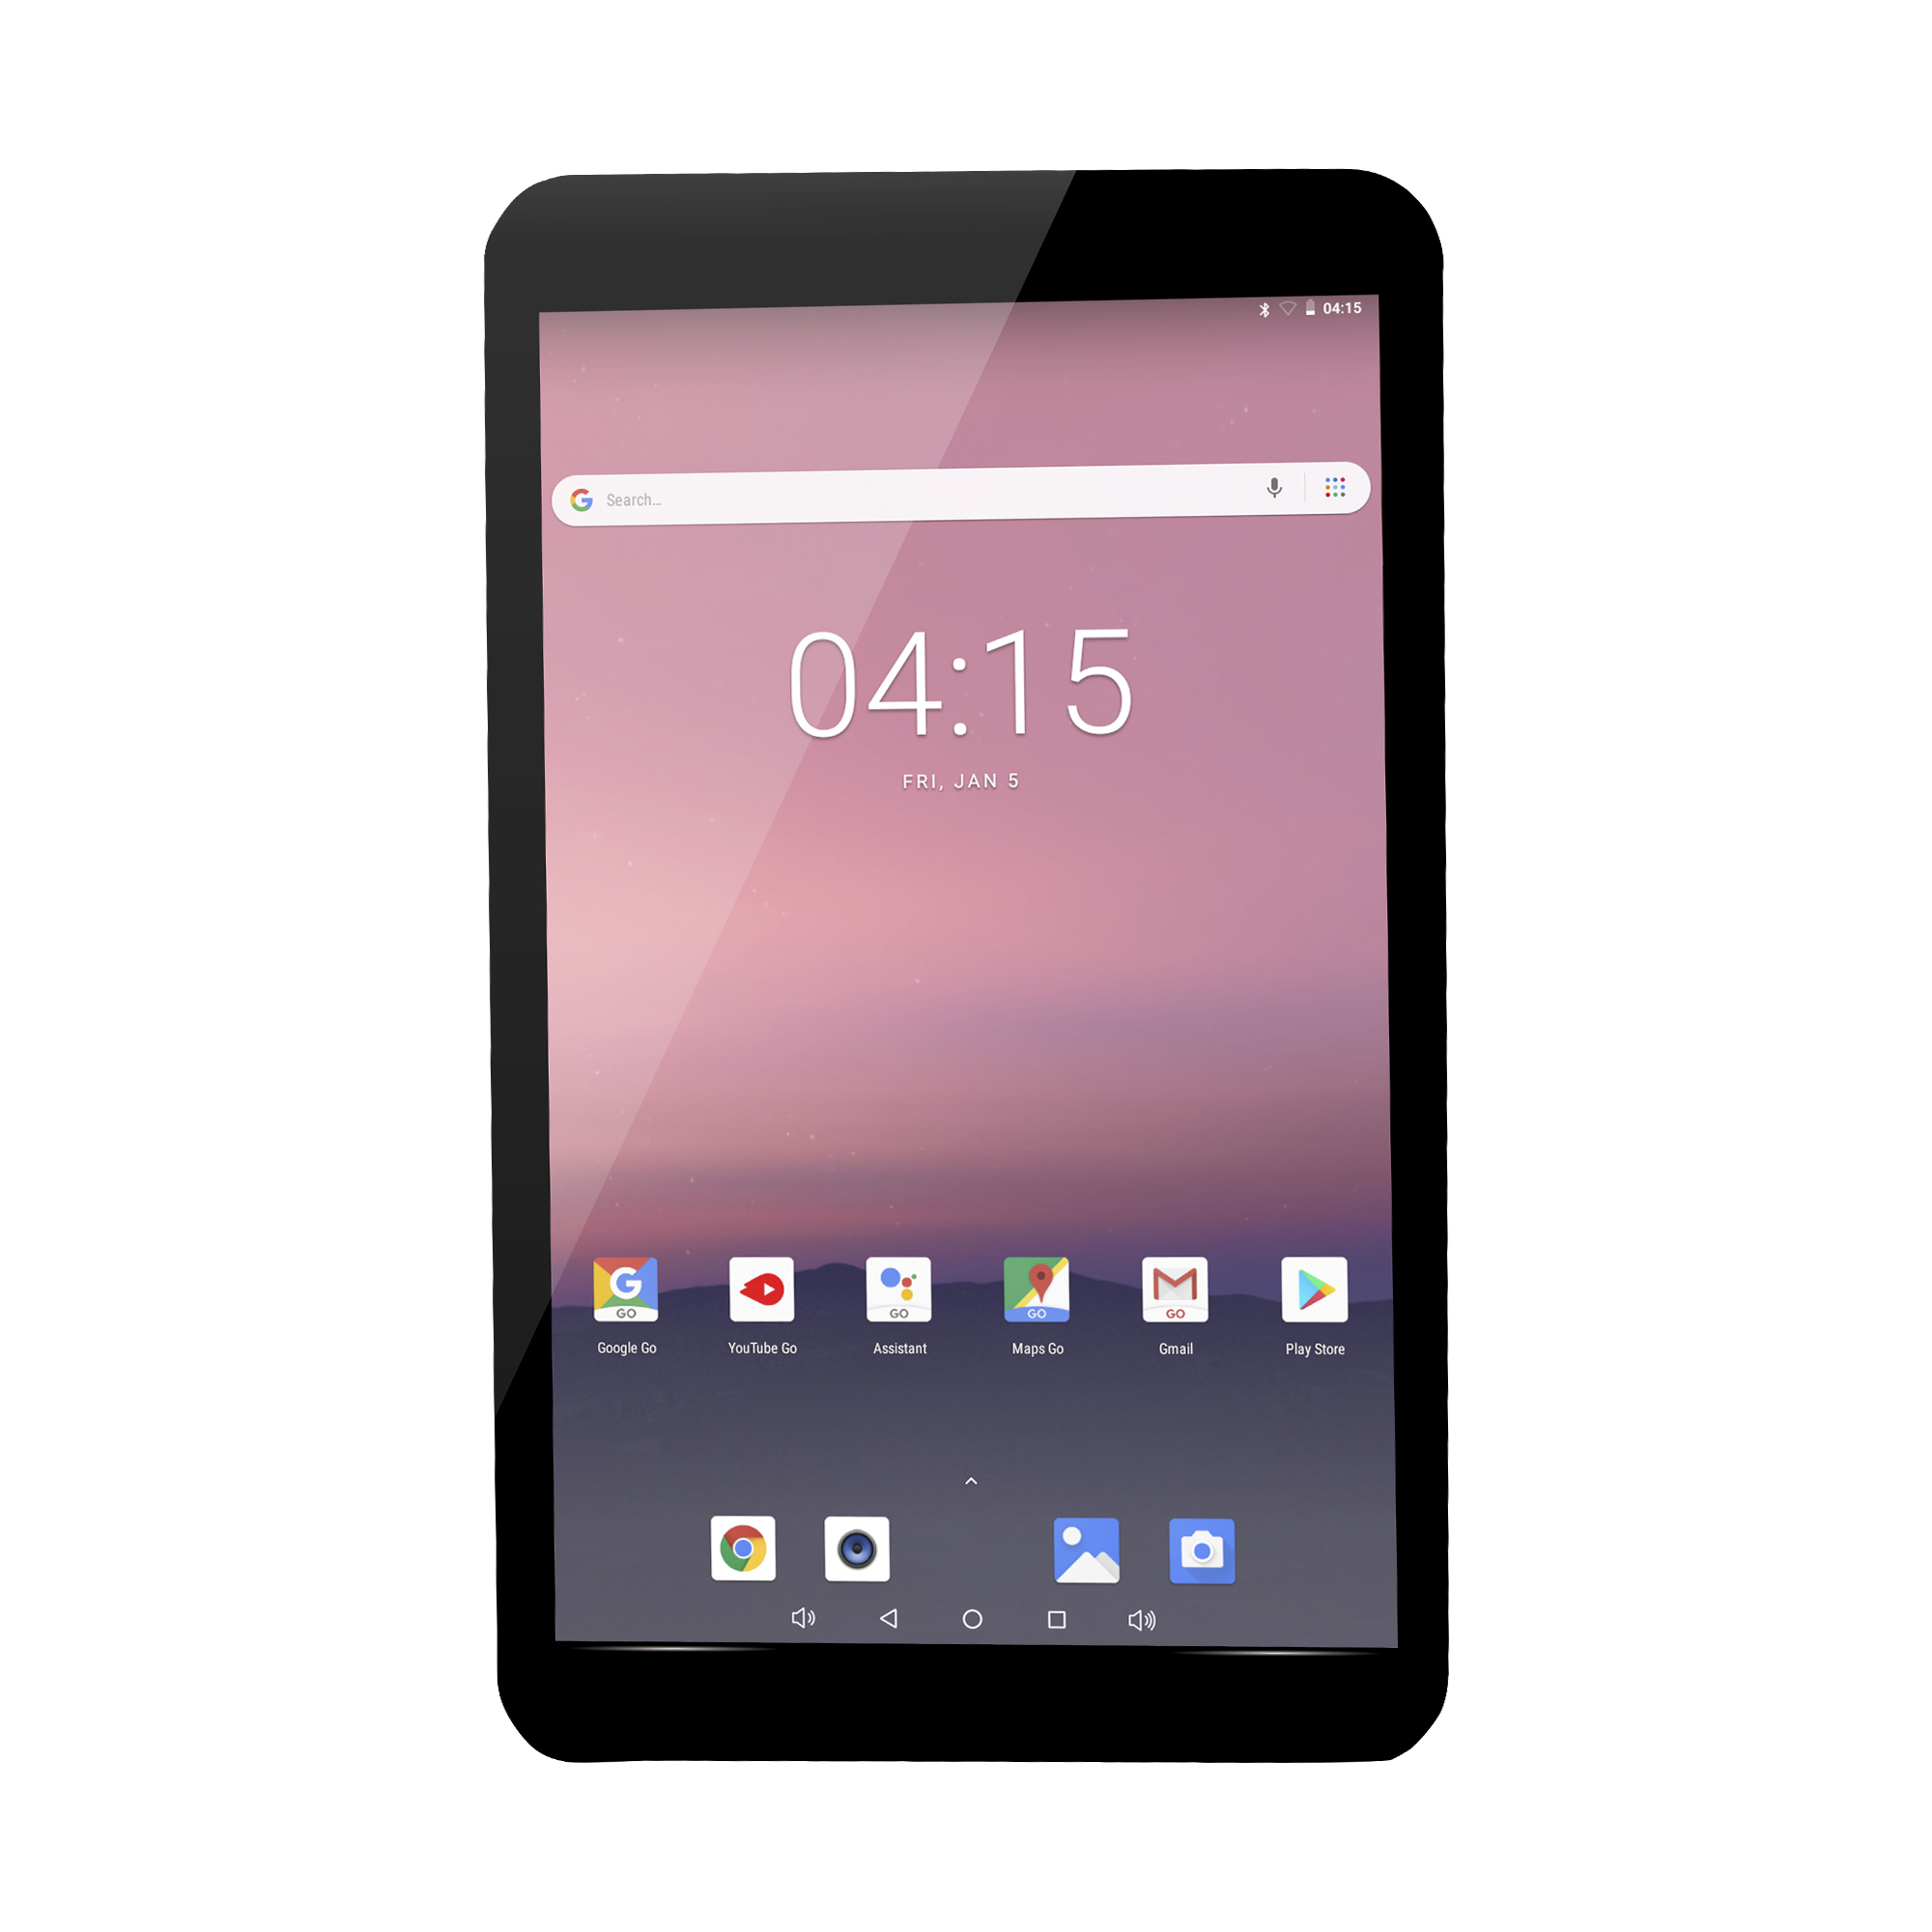 EVOO 8" Tablet, Android 8.1 Go Edition, Quad Core, 16GB Storage, Dual Cameras, Micro SD Slot, Black - image 1 of 4